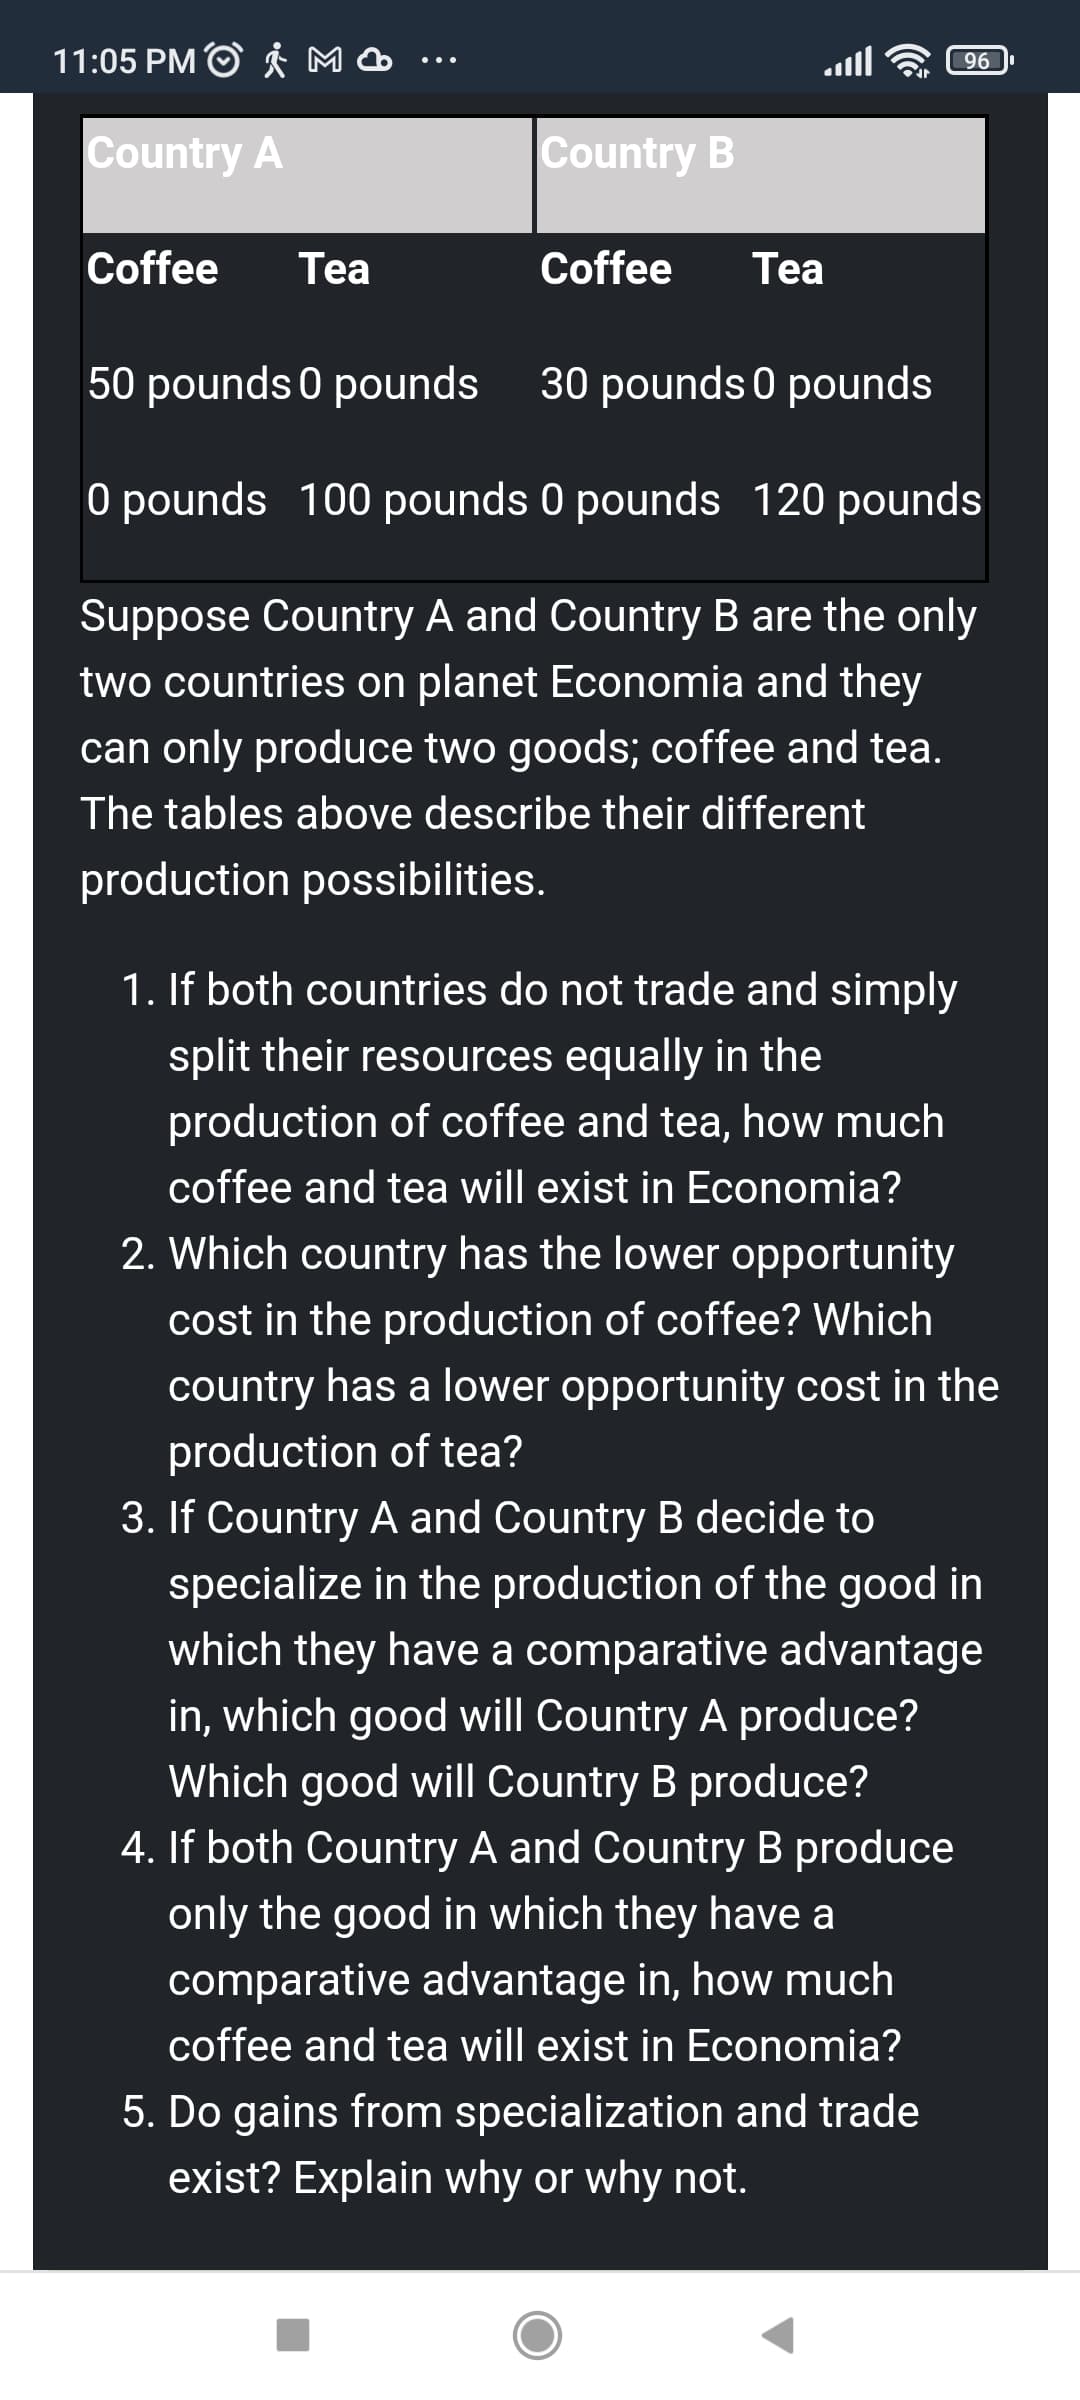 11:05 PM O Å M
96
Country A
Country B
Coffee
Tea
Coffee
Тea
50 pounds 0 pounds
30 pounds 0 pounds
O pounds 100 pounds 0 pounds 120 pounds
Suppose Country A and Country B are the only
two countries on planet Economia and they
can only produce two goods; coffee and tea.
The tables above describe their different
production possibilities.
1. If both countries do not trade and simply
split their resources equally in the
production of coffee and tea, how much
coffee and tea will exist in Economia?
2. Which country has the lower opportunity
cost in the production of coffee? Which
country has a lower opportunity cost in the
production of tea?
3. If Country A and Country B decide to
specialize in the production of the good in
which they have a comparative advantage
in, which good will Country A produce?
Which good will Country B produce?
4. If both Country A and Country B produce
only the good in which they have a
comparative advantage in, how much
coffee and tea will exist in Economia?
5. Do gains from specialization and trade
exist? Explain why or why not.
